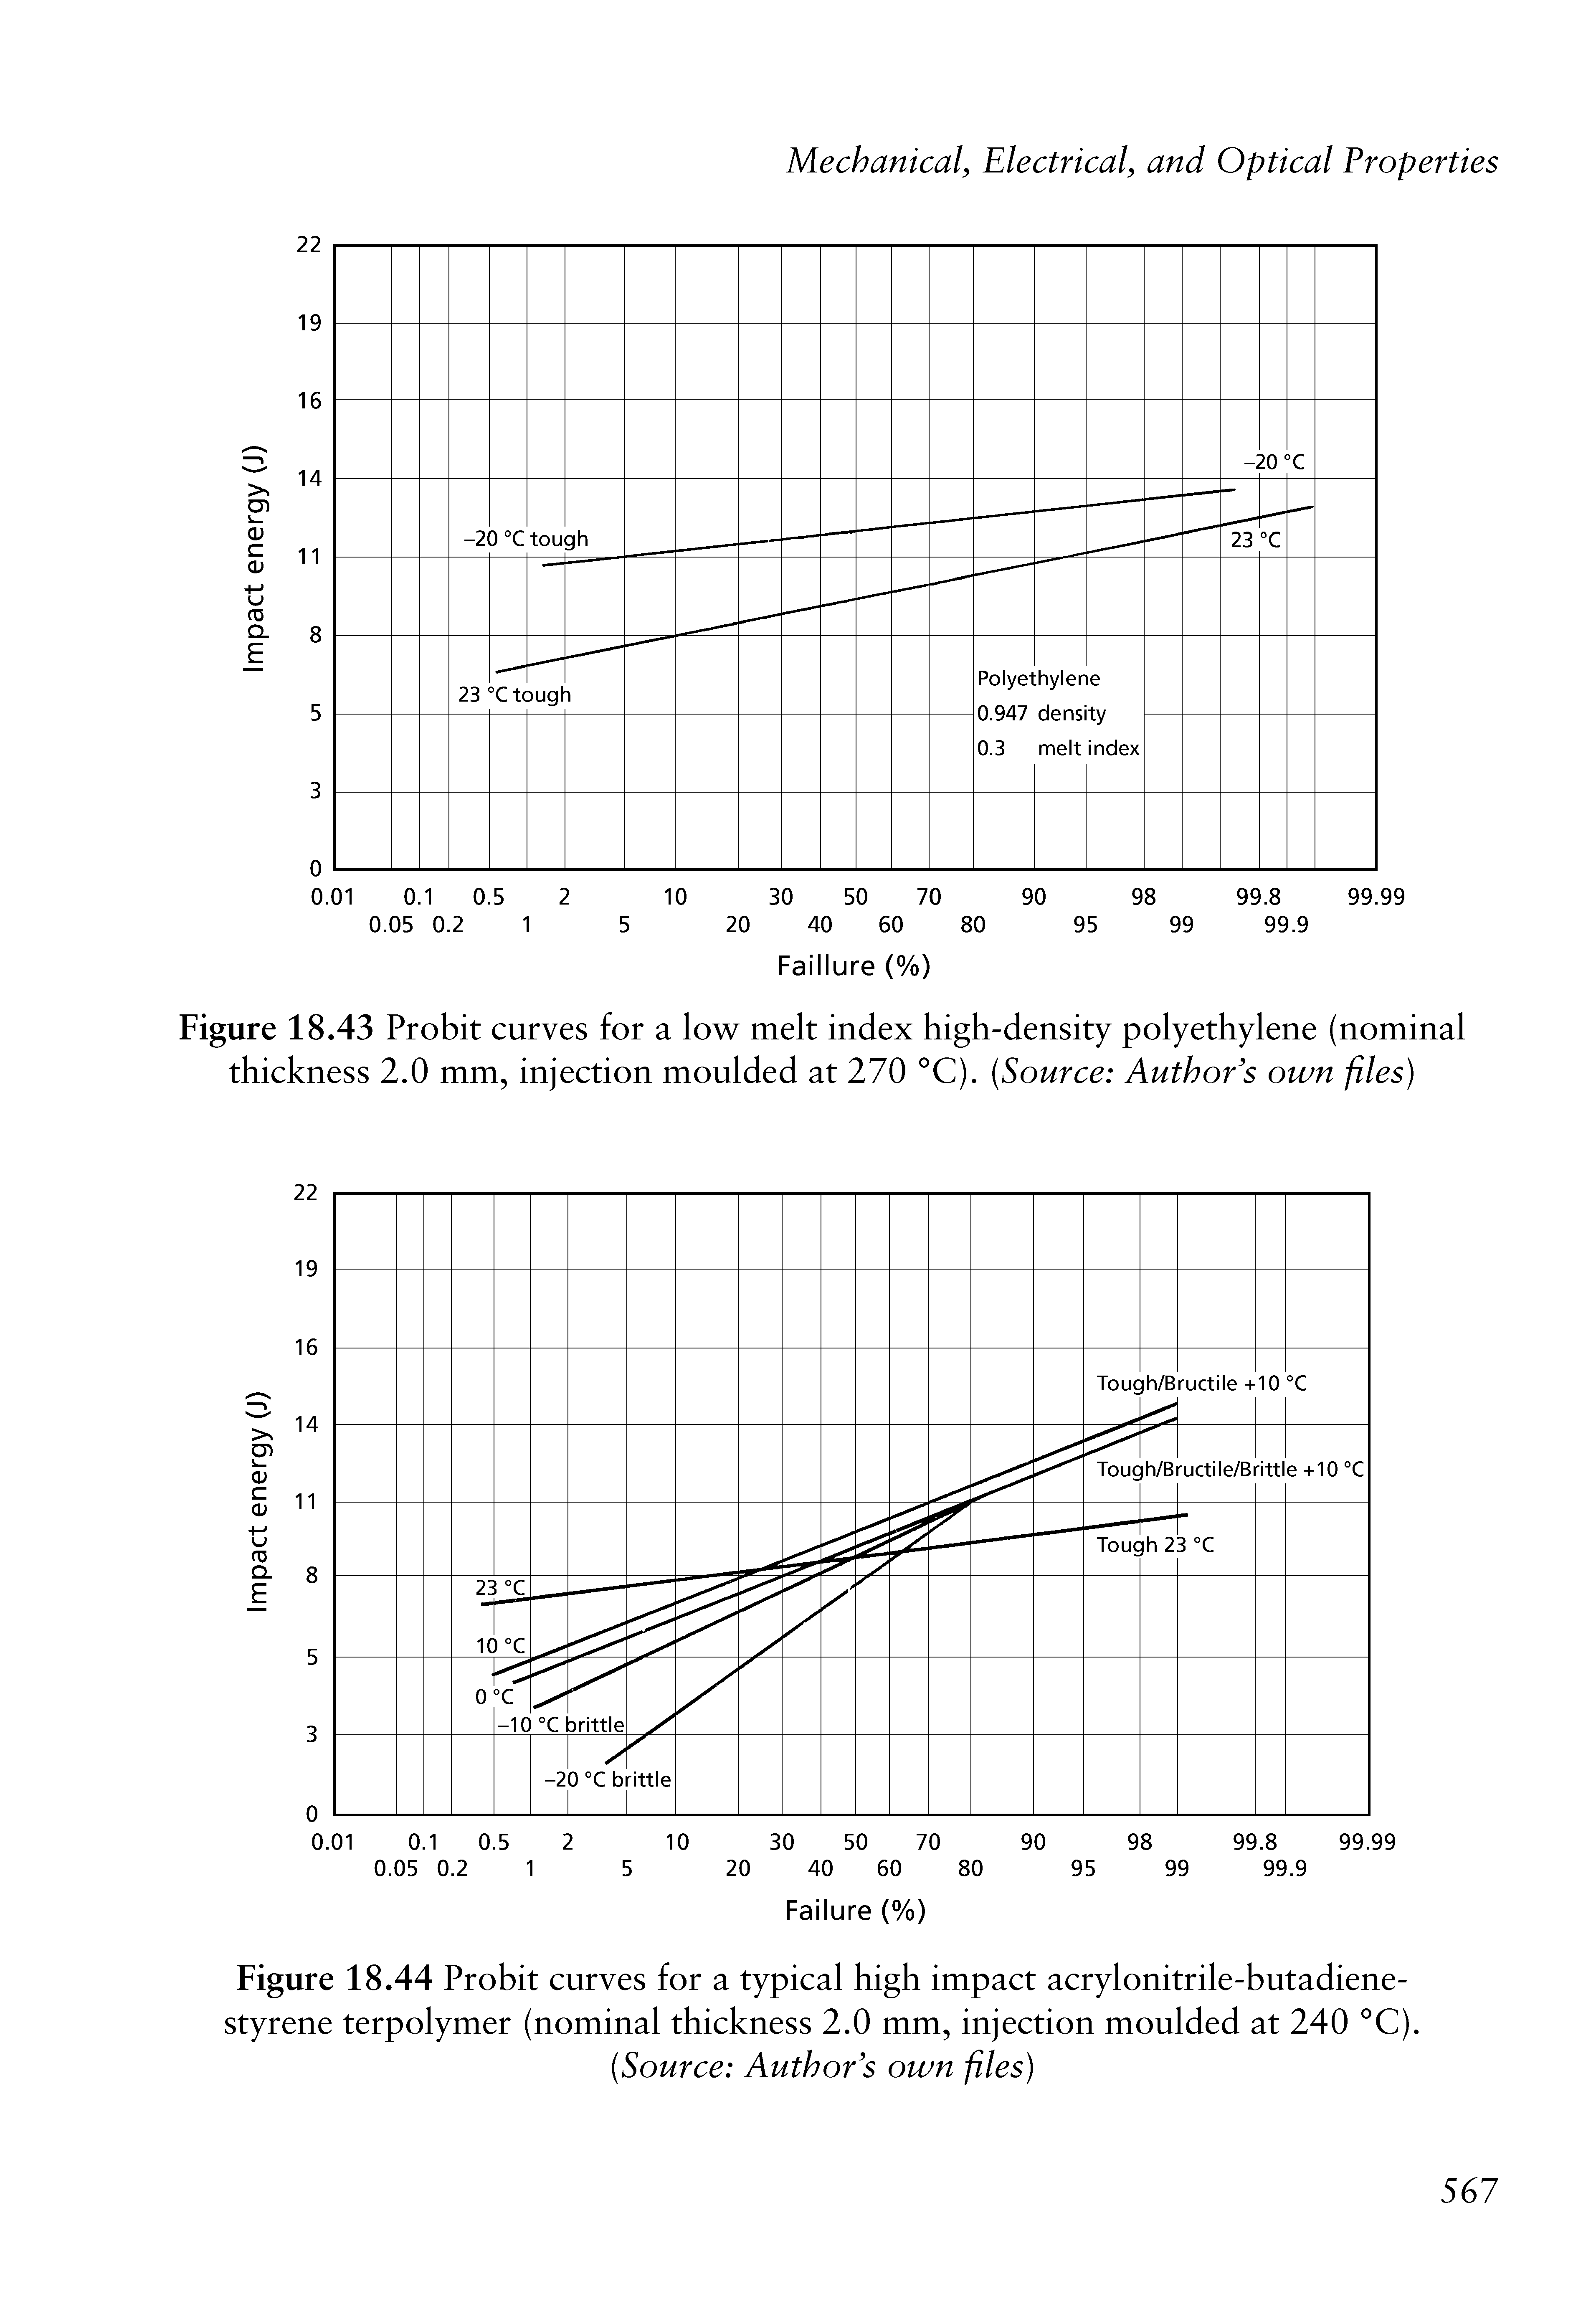 Figure 18.44 Probit curves for a typical high impact acrylonitrile-butadiene-styrene terpolymer (nominal thickness 2.0 mm, injection moulded at 240 °C).